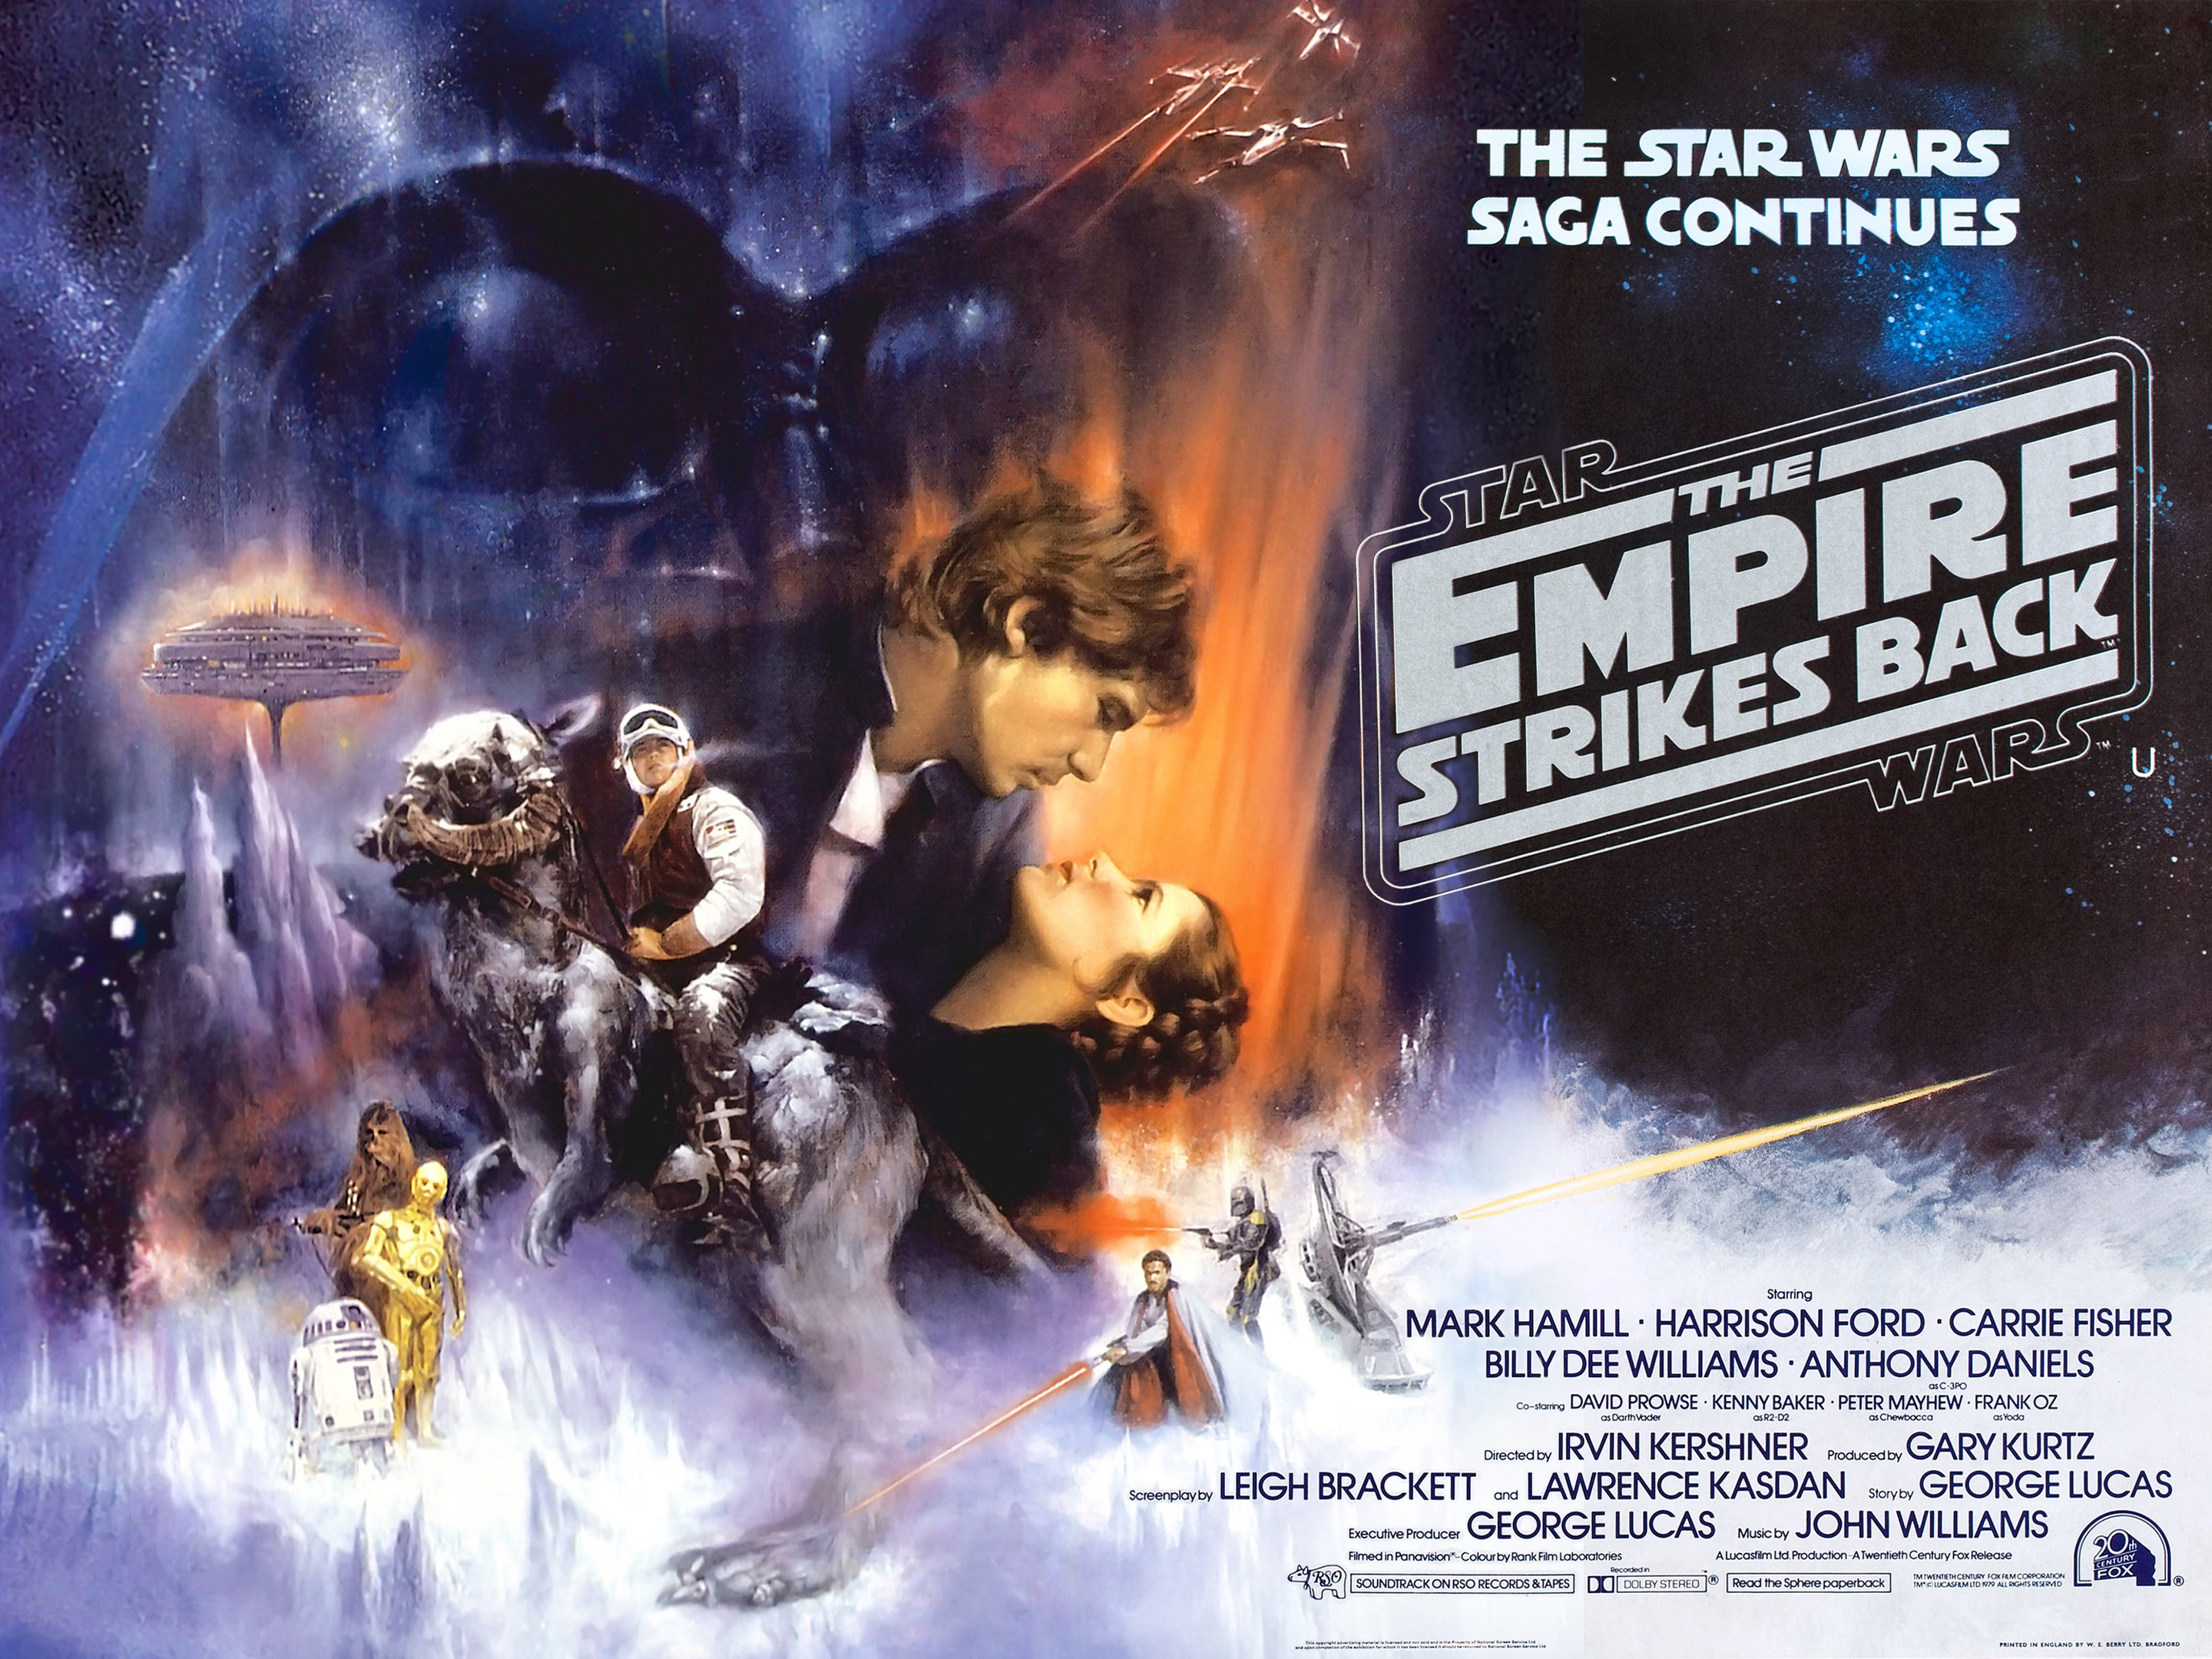 The Cleveland Orchestra: Sarah Hicks – Star Wars' The Empire Strikes Back – Film With Live Orchestra